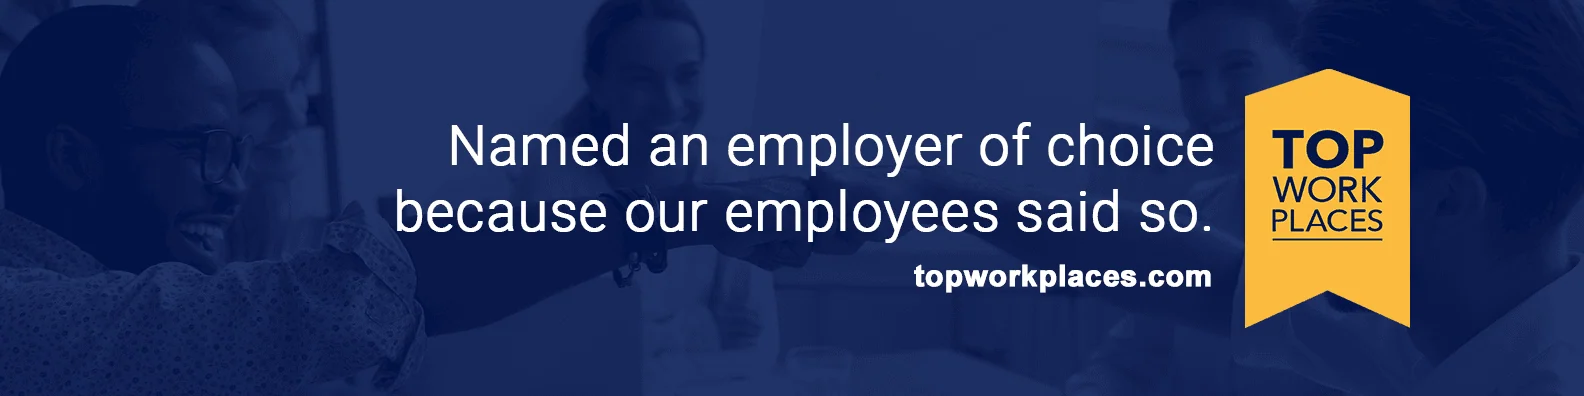 Top Workplaces banner that reads, "Named an employer of choice because our employees said so,"